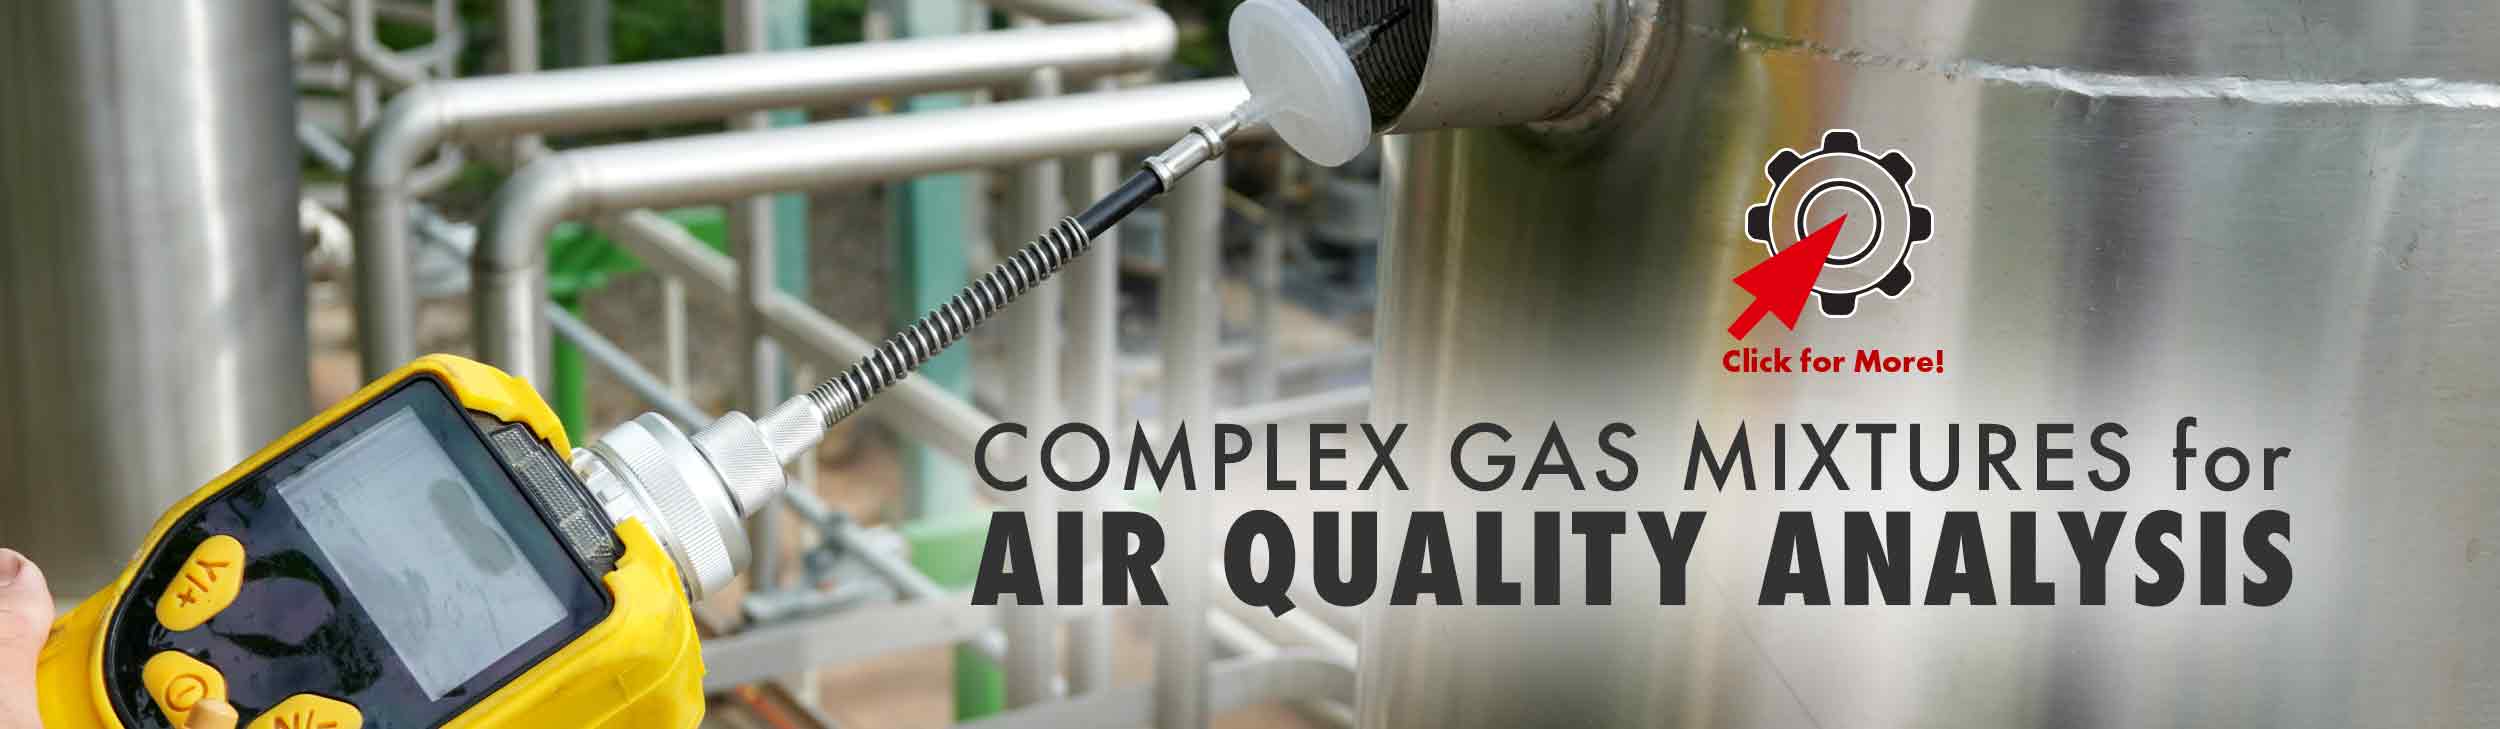 KIN-TEK Complex Gas Mixtures for Air Quality Image